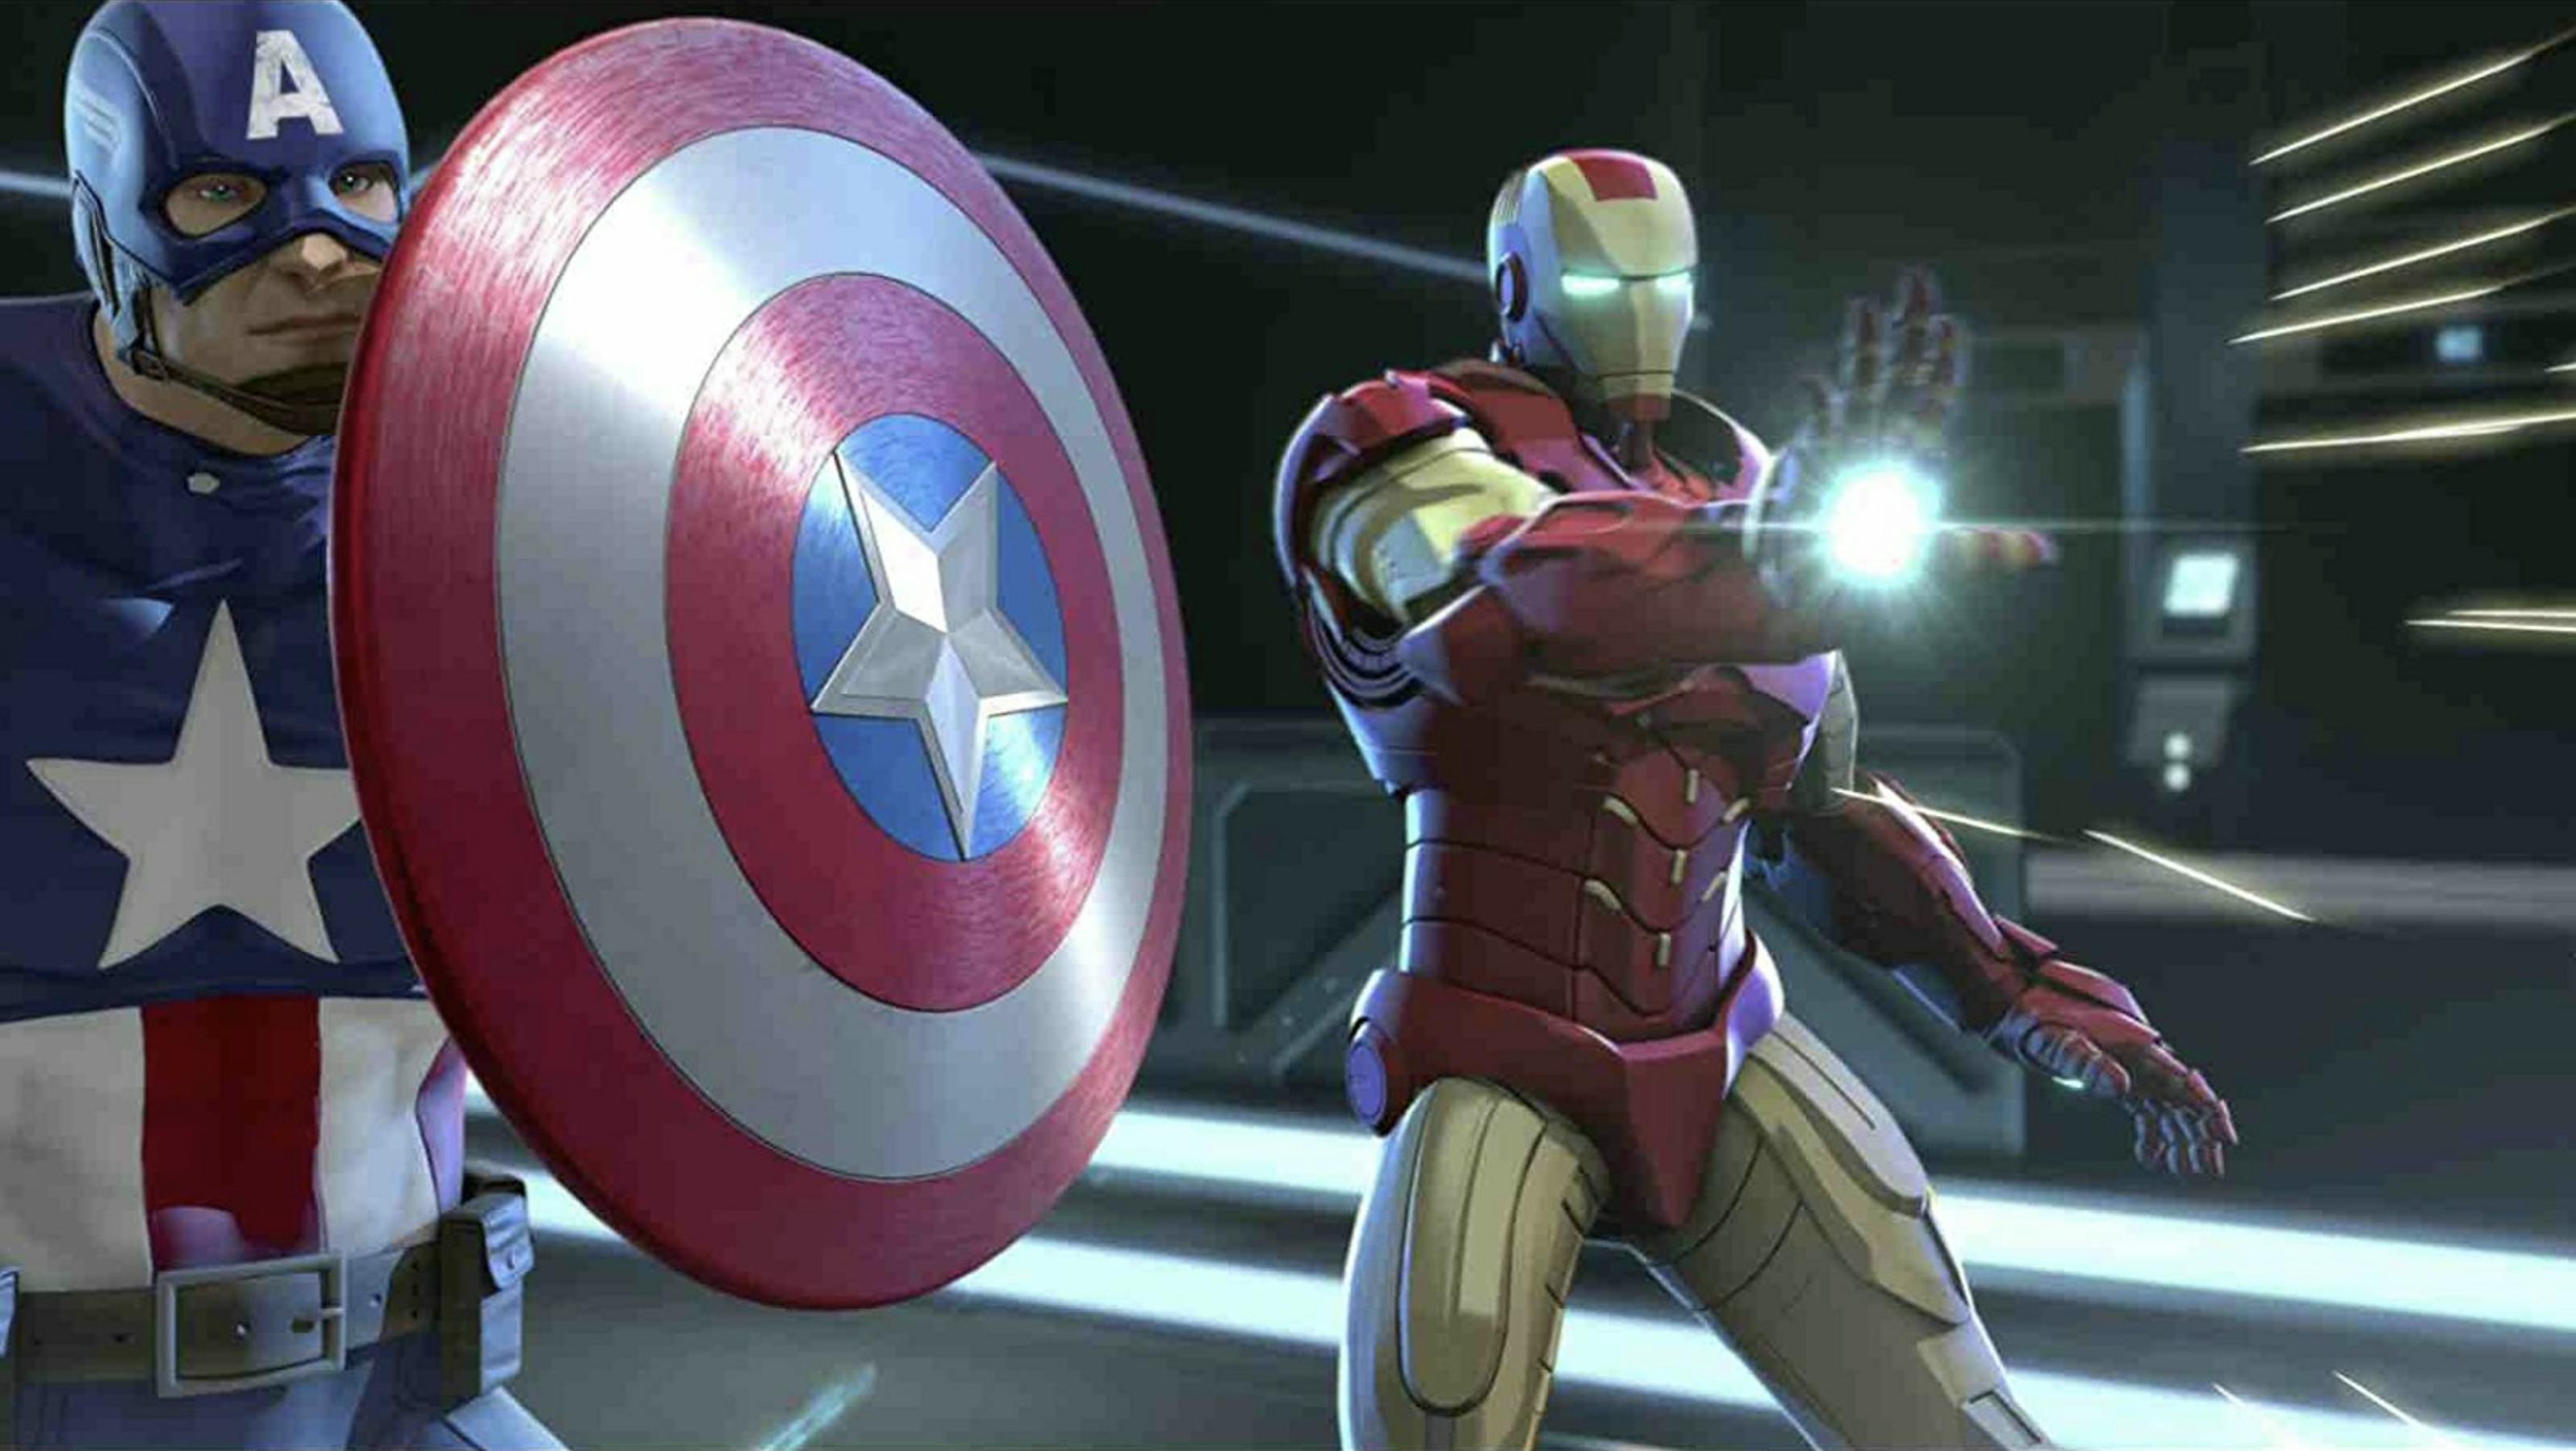 Marvel Animated Movies The Best Order To Watch Them All